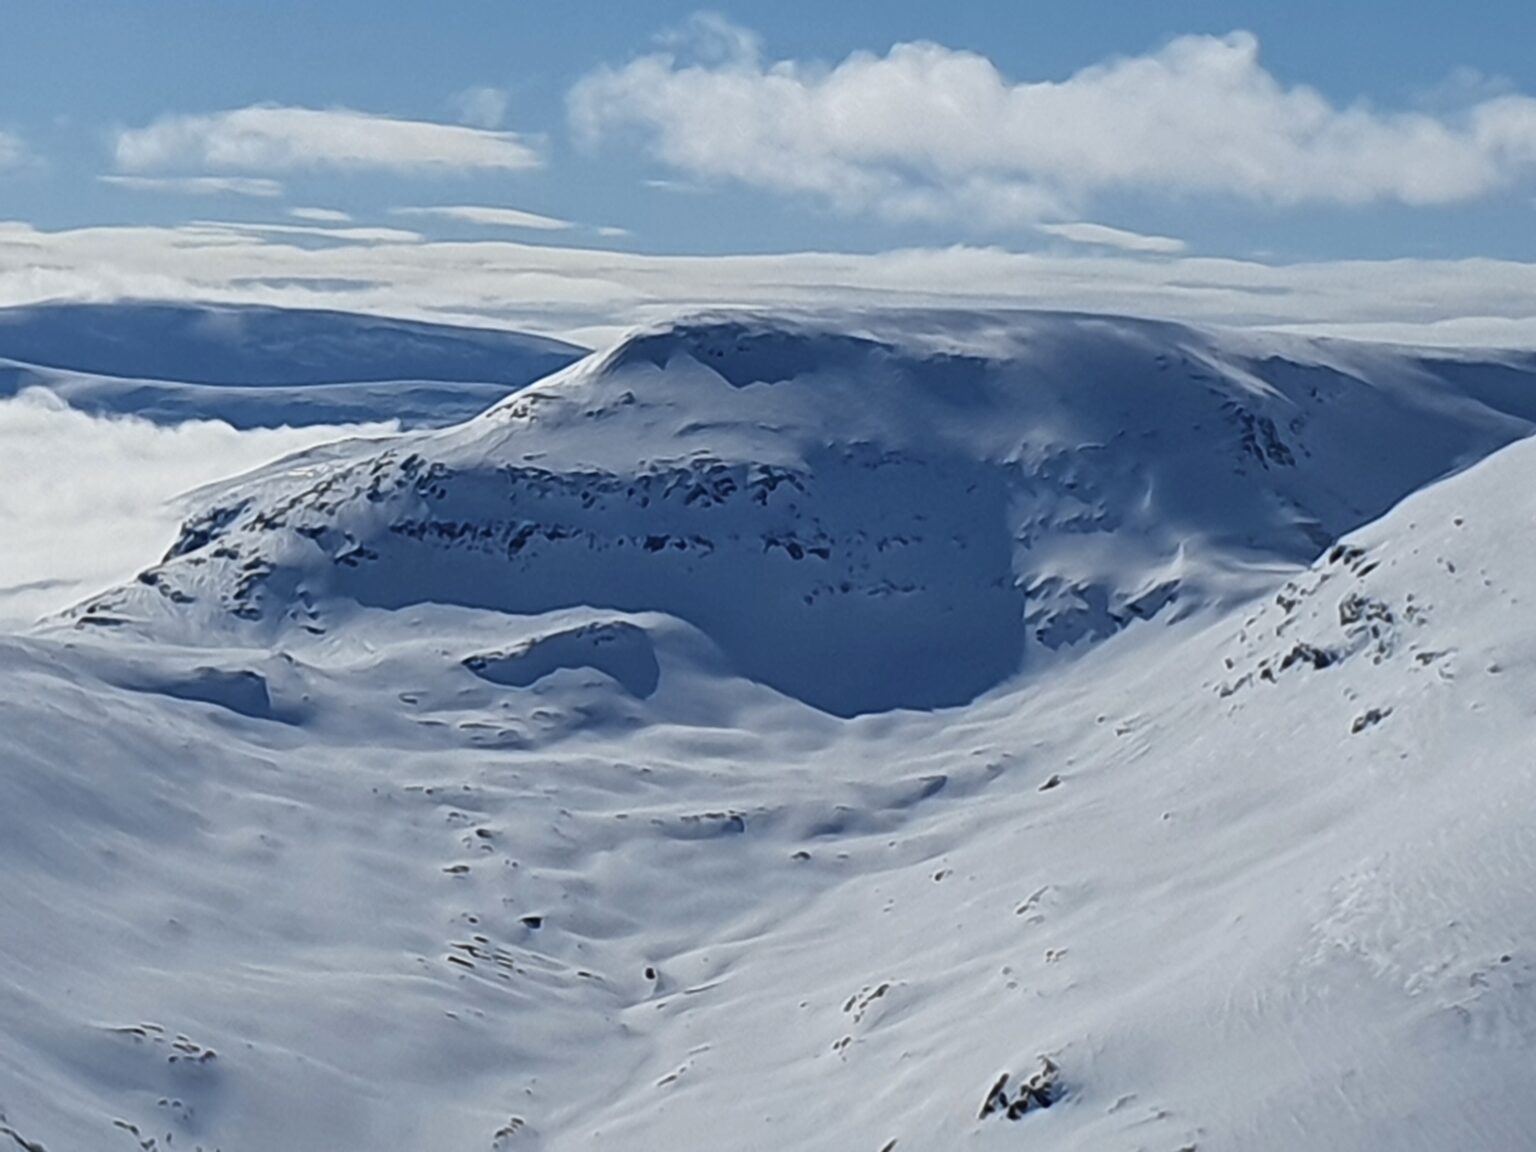 A closer look at the North face of Brattlifjellet